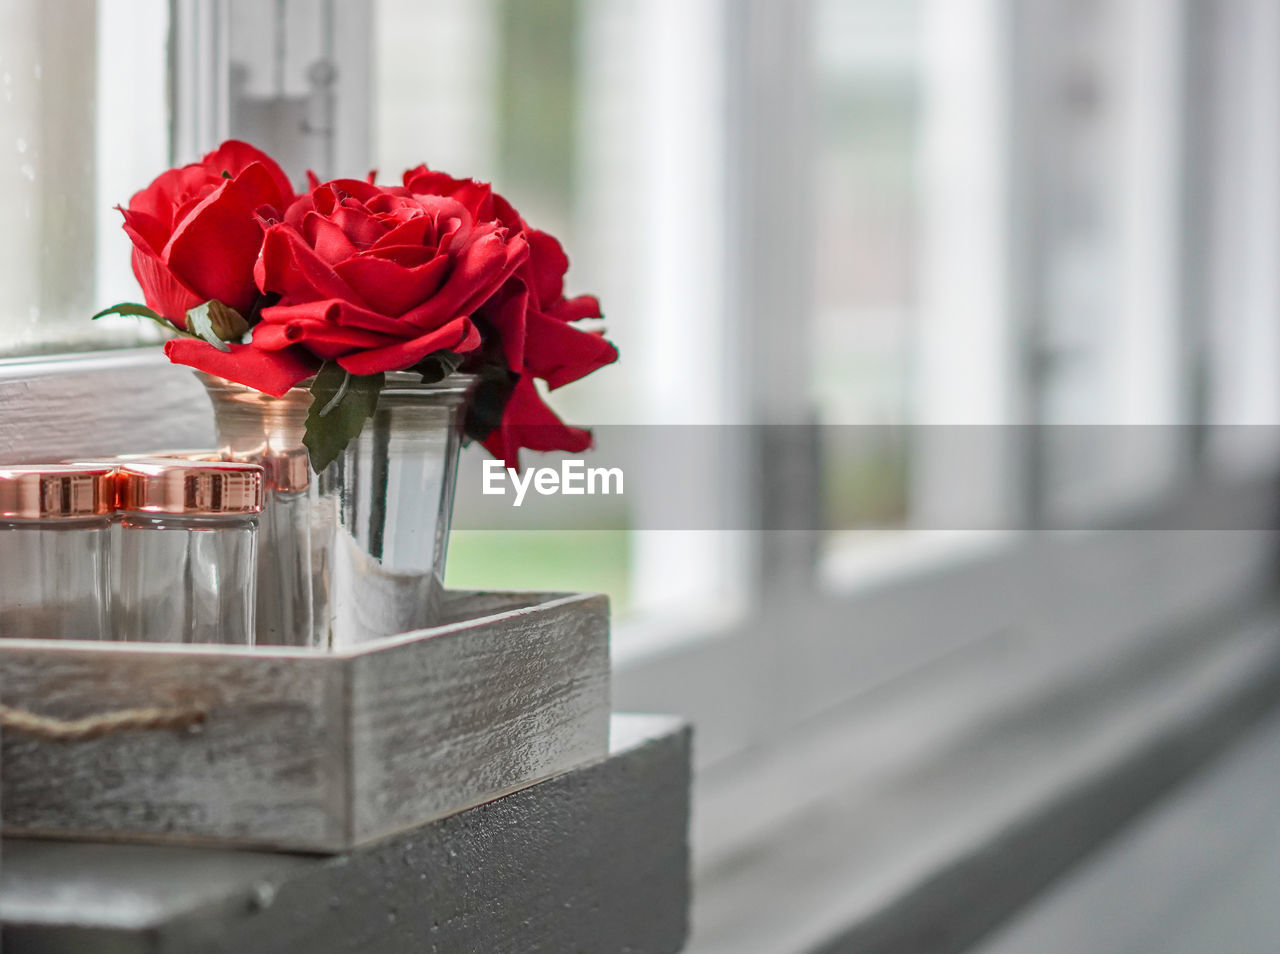 CLOSE-UP OF RED ROSE ON TABLE AT WINDOW